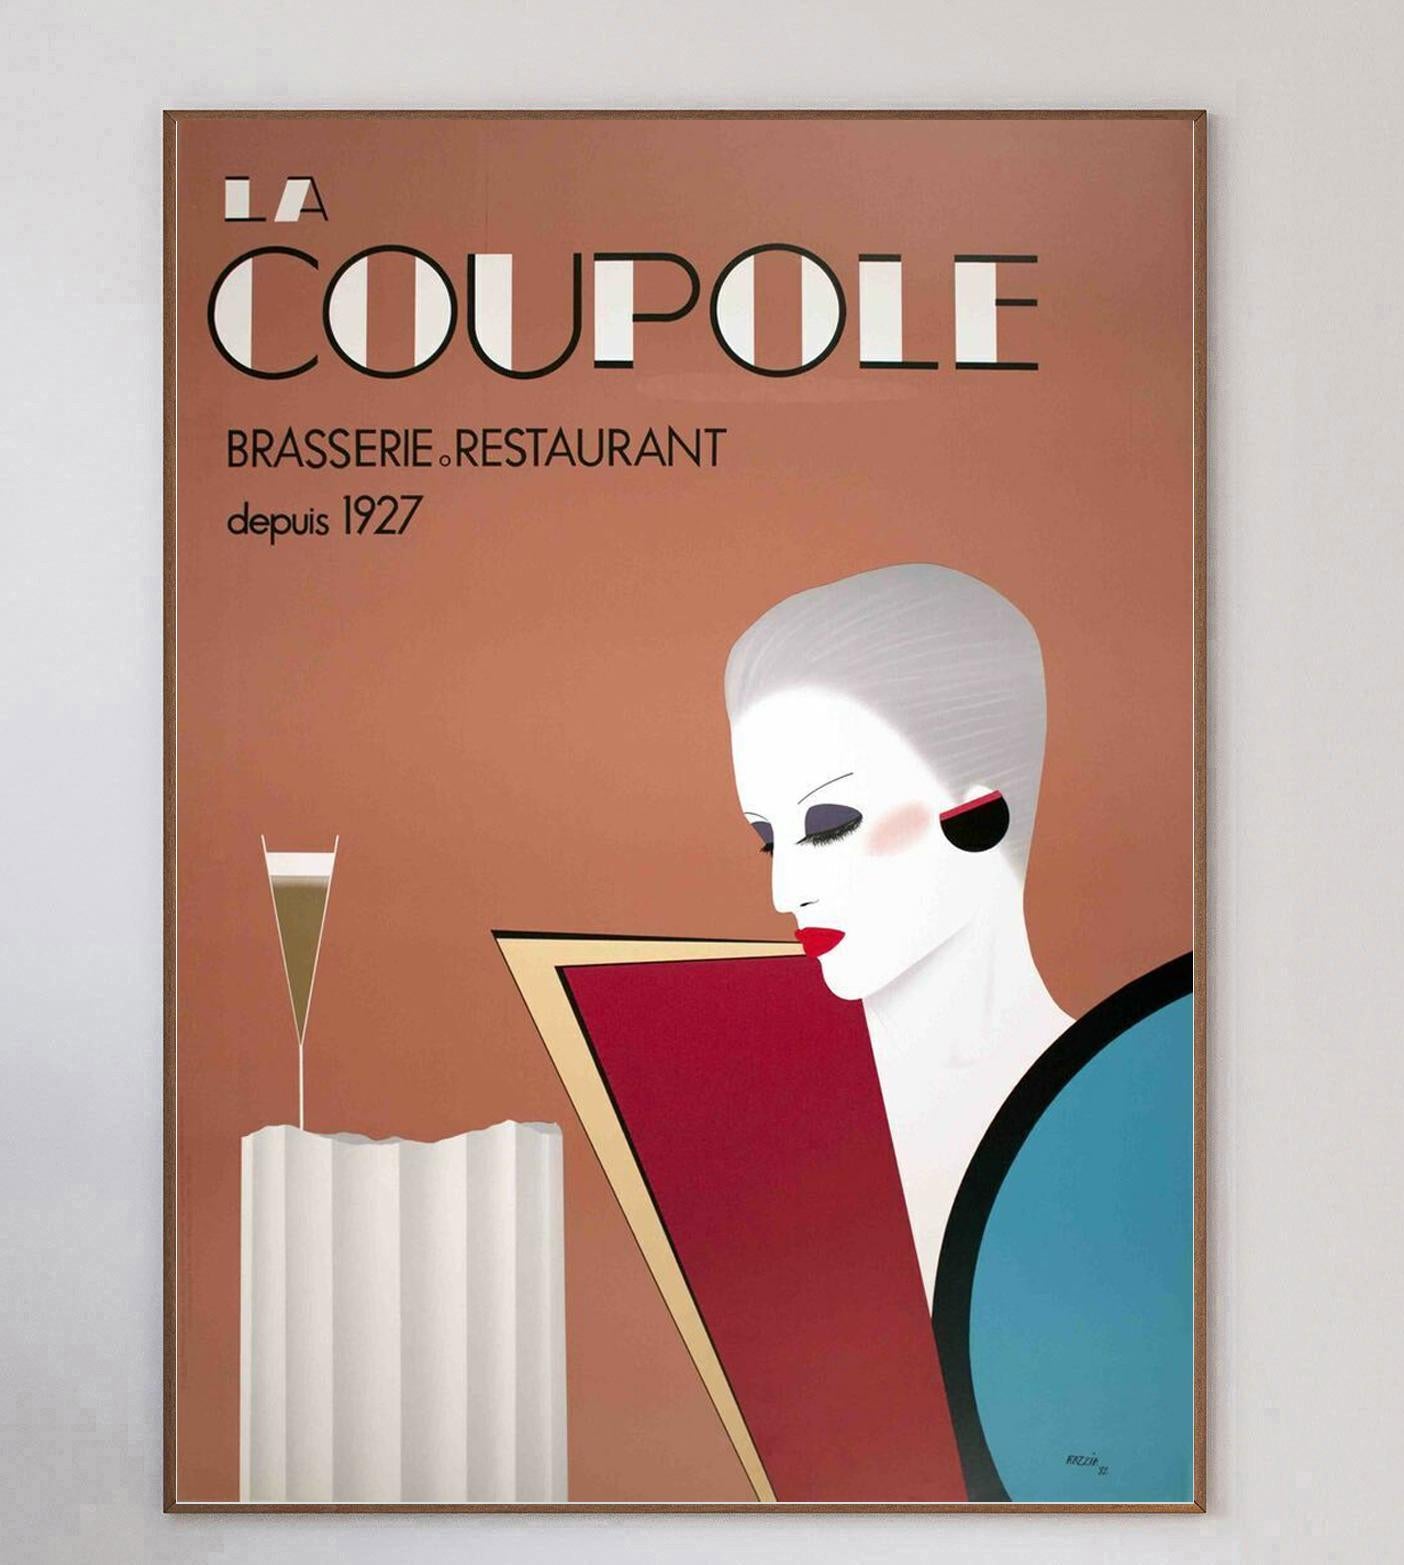 Created for the famous art deco brasserie in Paris, France, this beautiful poster by Razzia depicts a stylish woman with champagne. Razzia is best known for his collaborations with fashion houses such as Louis Vuitton, and this vibrant piece is